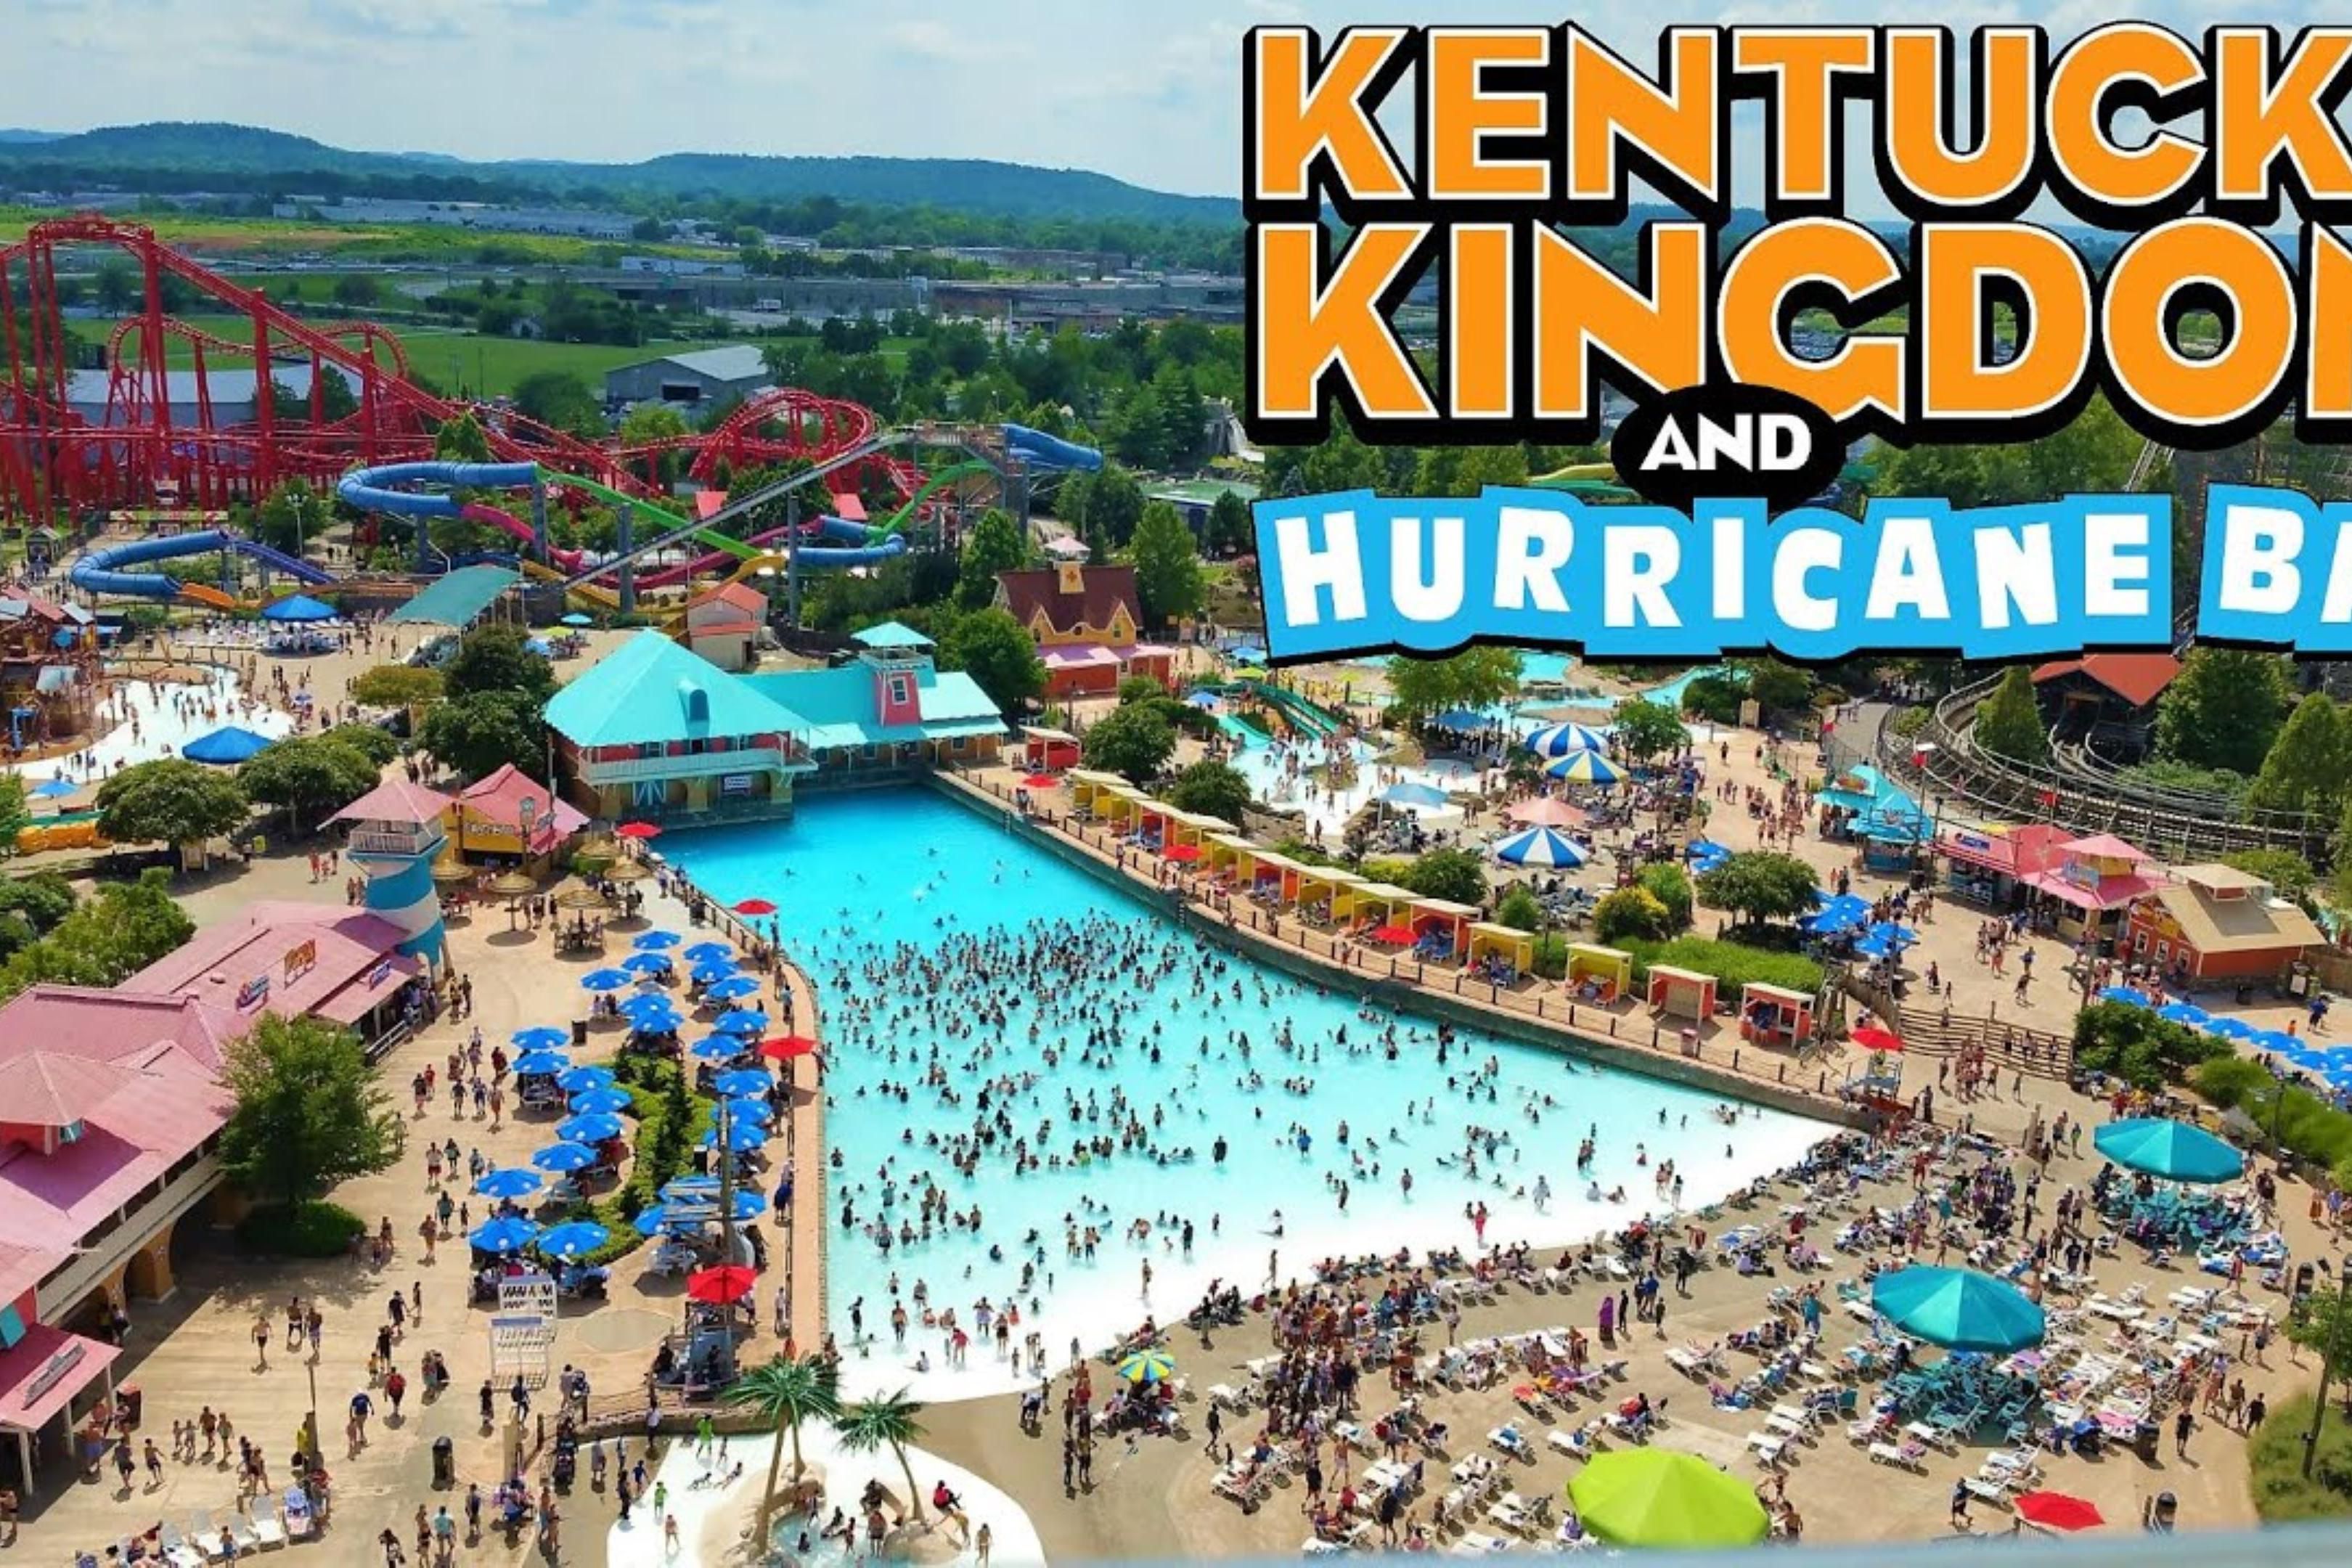 Kentucky Kingdom open! Our hotel is located right across the street from the park offering free parking and breakfast. 
